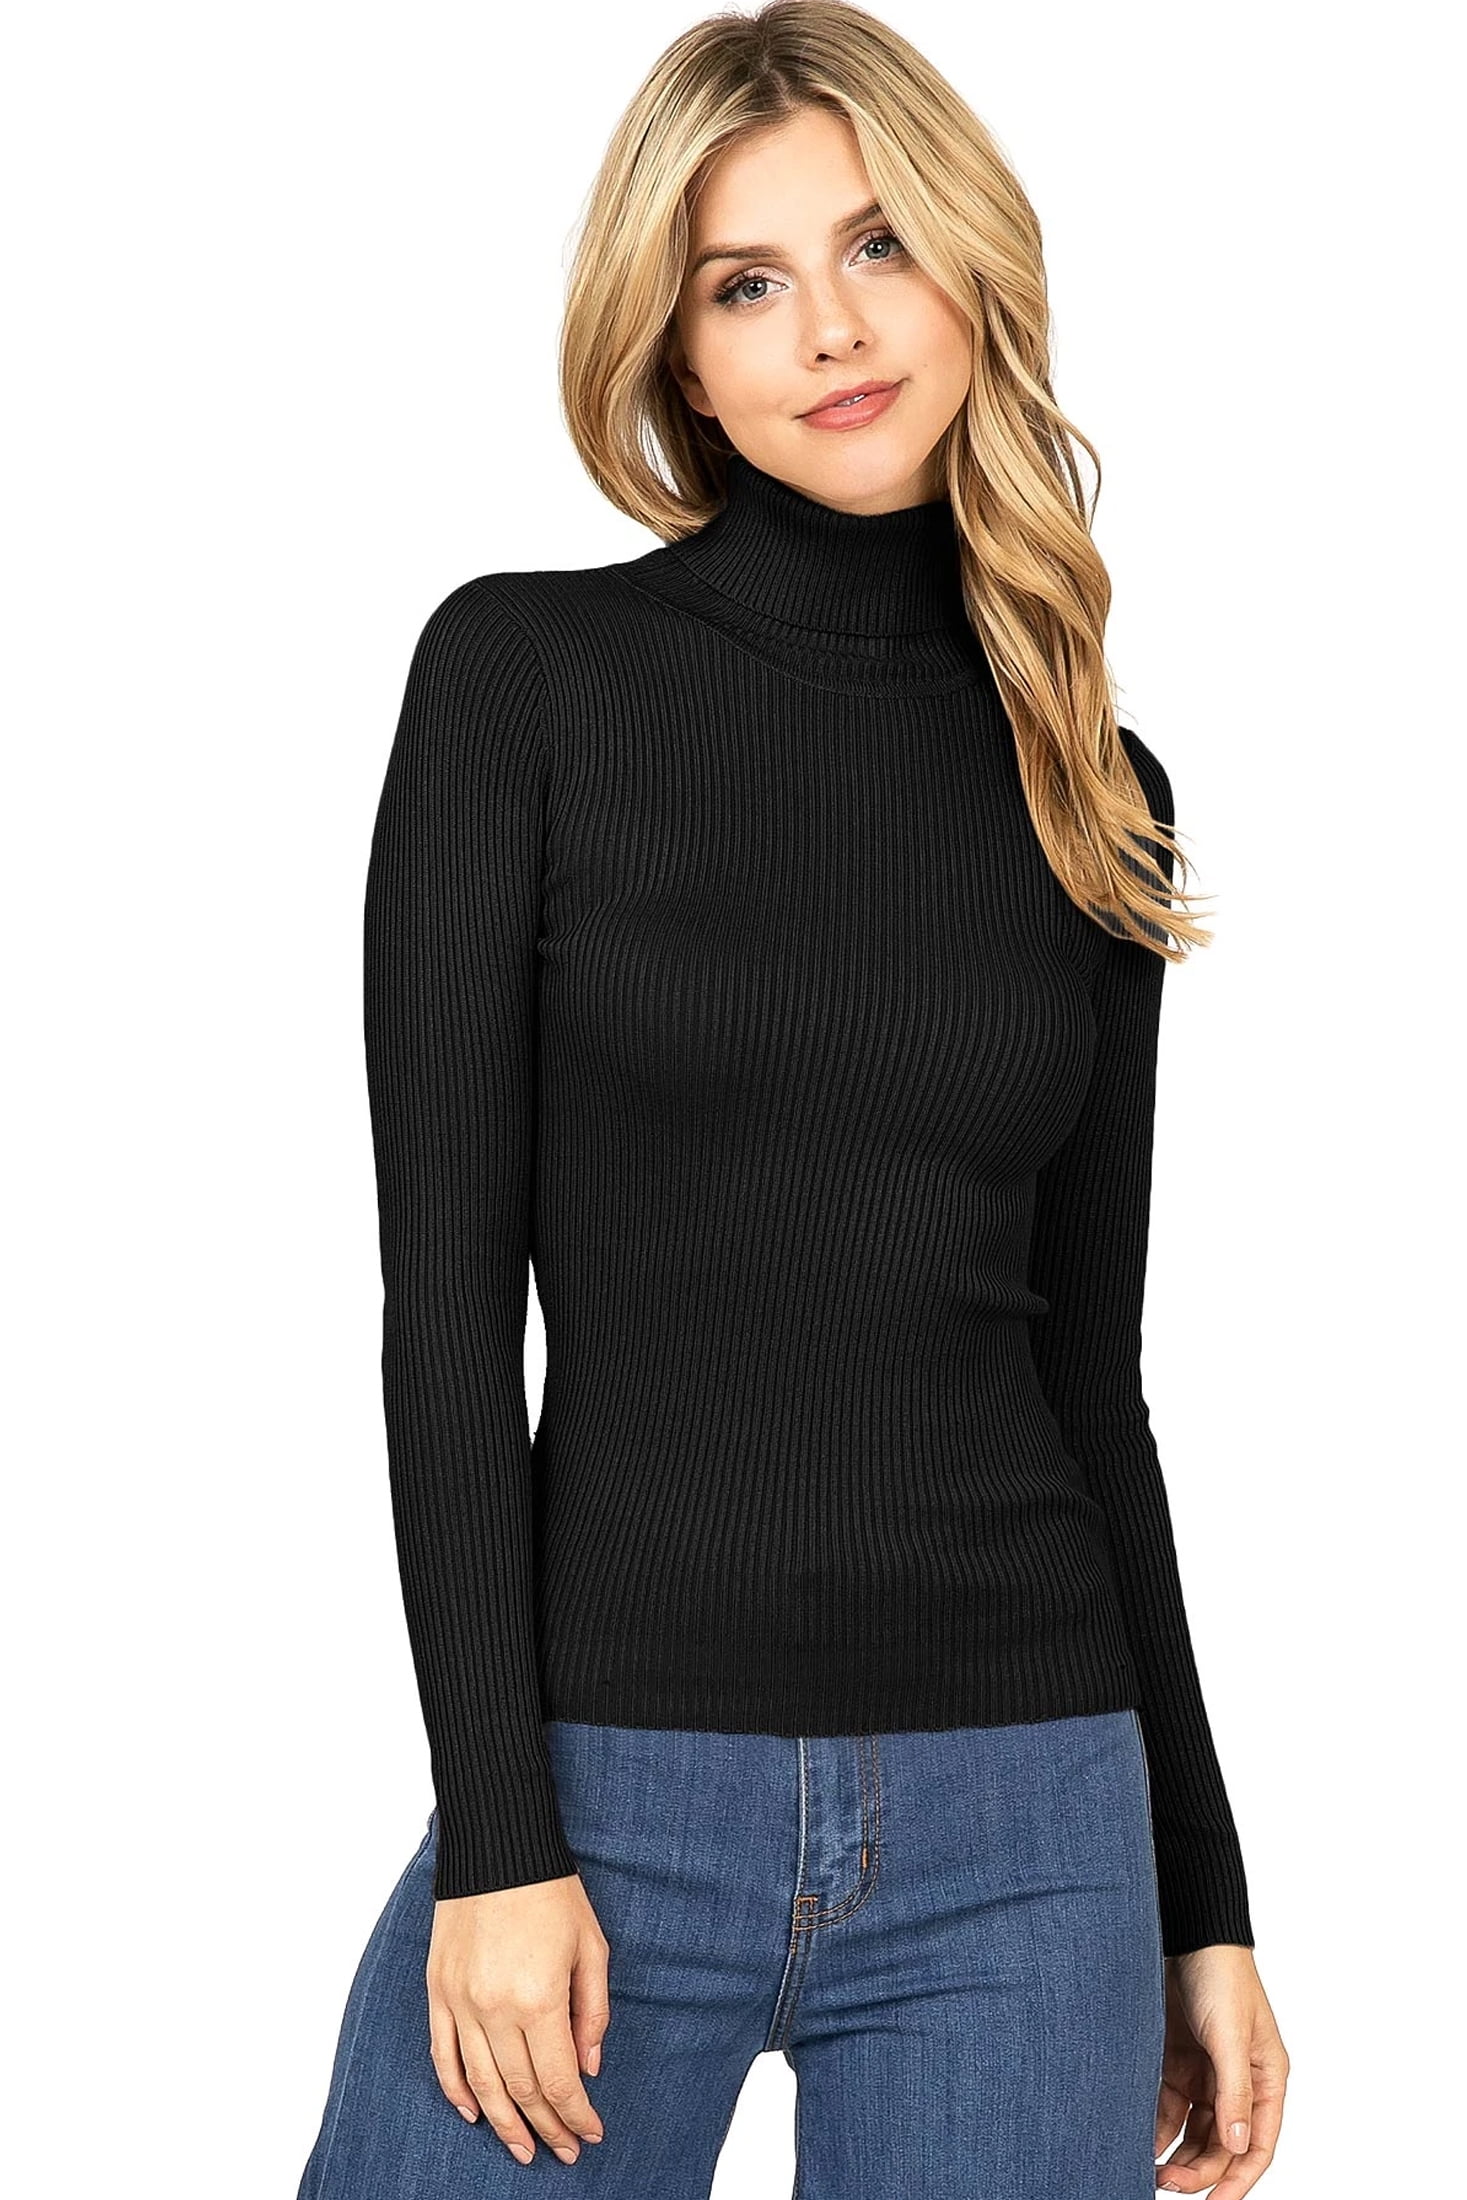 Ambiance Apparel Women S Stretchy Ribbed Long Sleeve Turtle Neck Top L Black Walmart Com